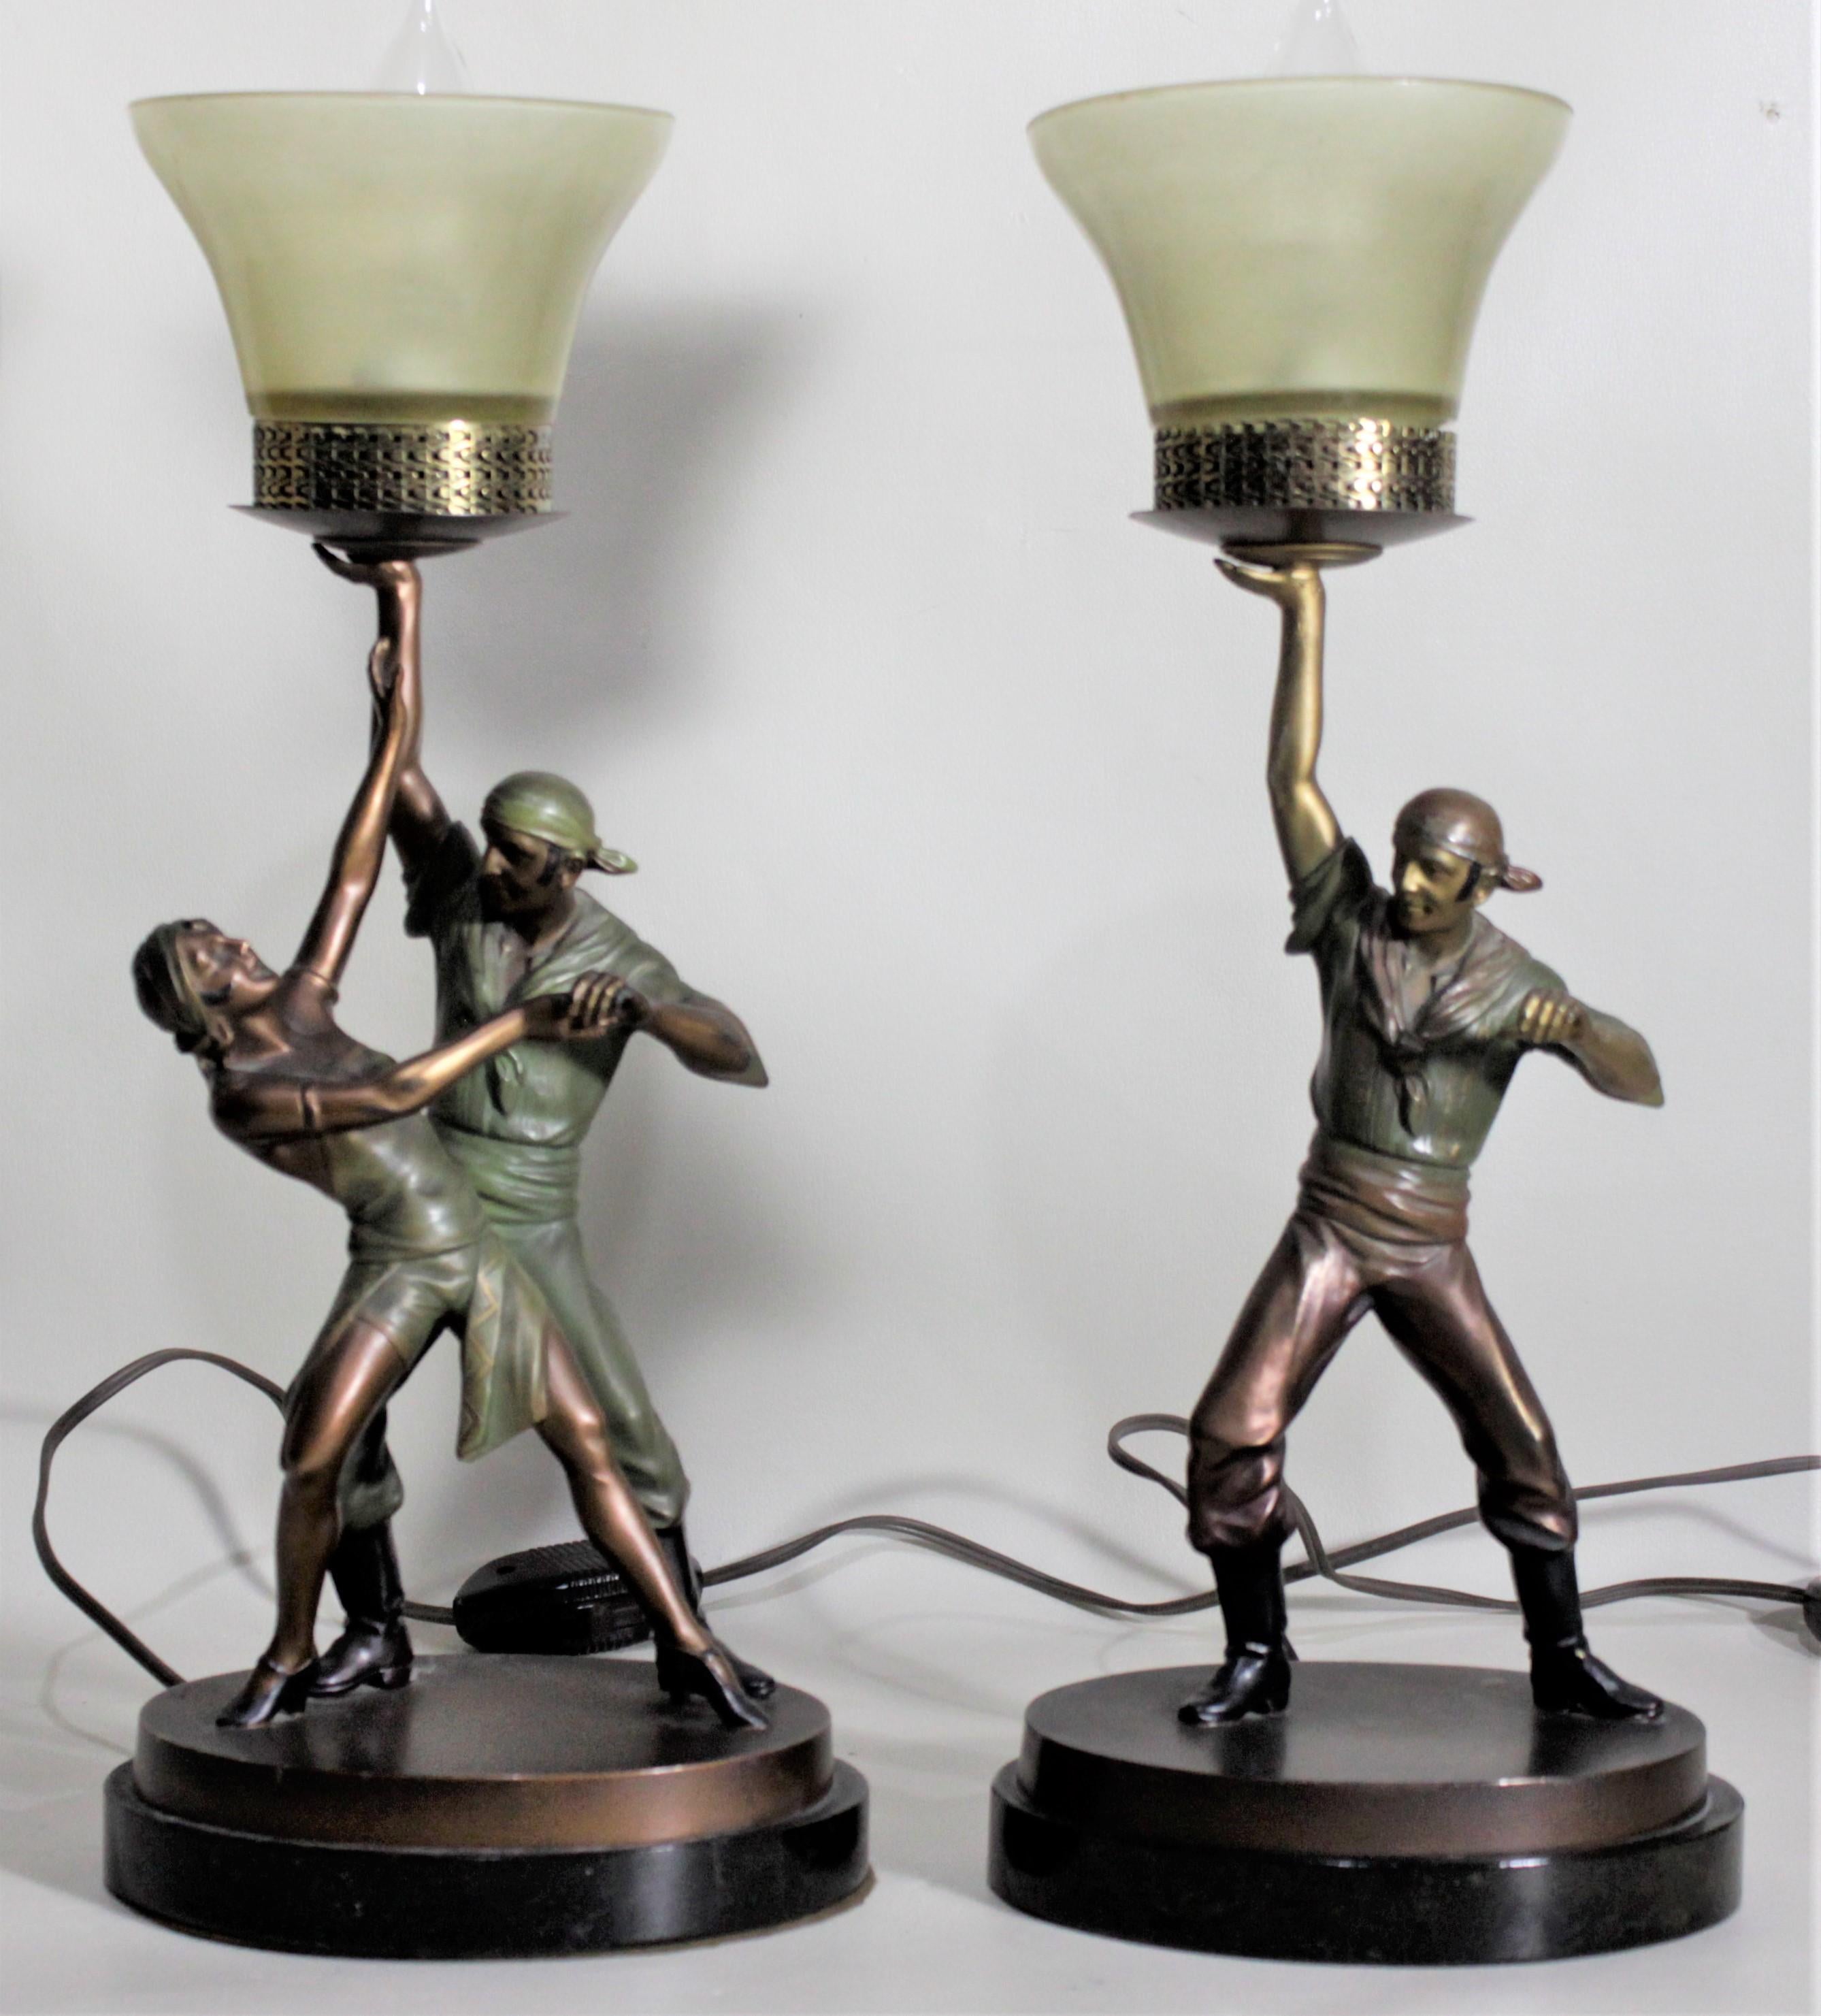 This pair of cast spelter lamps are unsigned but believed to have been made in Austria in circa 1920 in the period Art Deco style. Each lamp is ornately cast and cold-painted and depict figural theatrical pirate figures in a bronze toned finish with